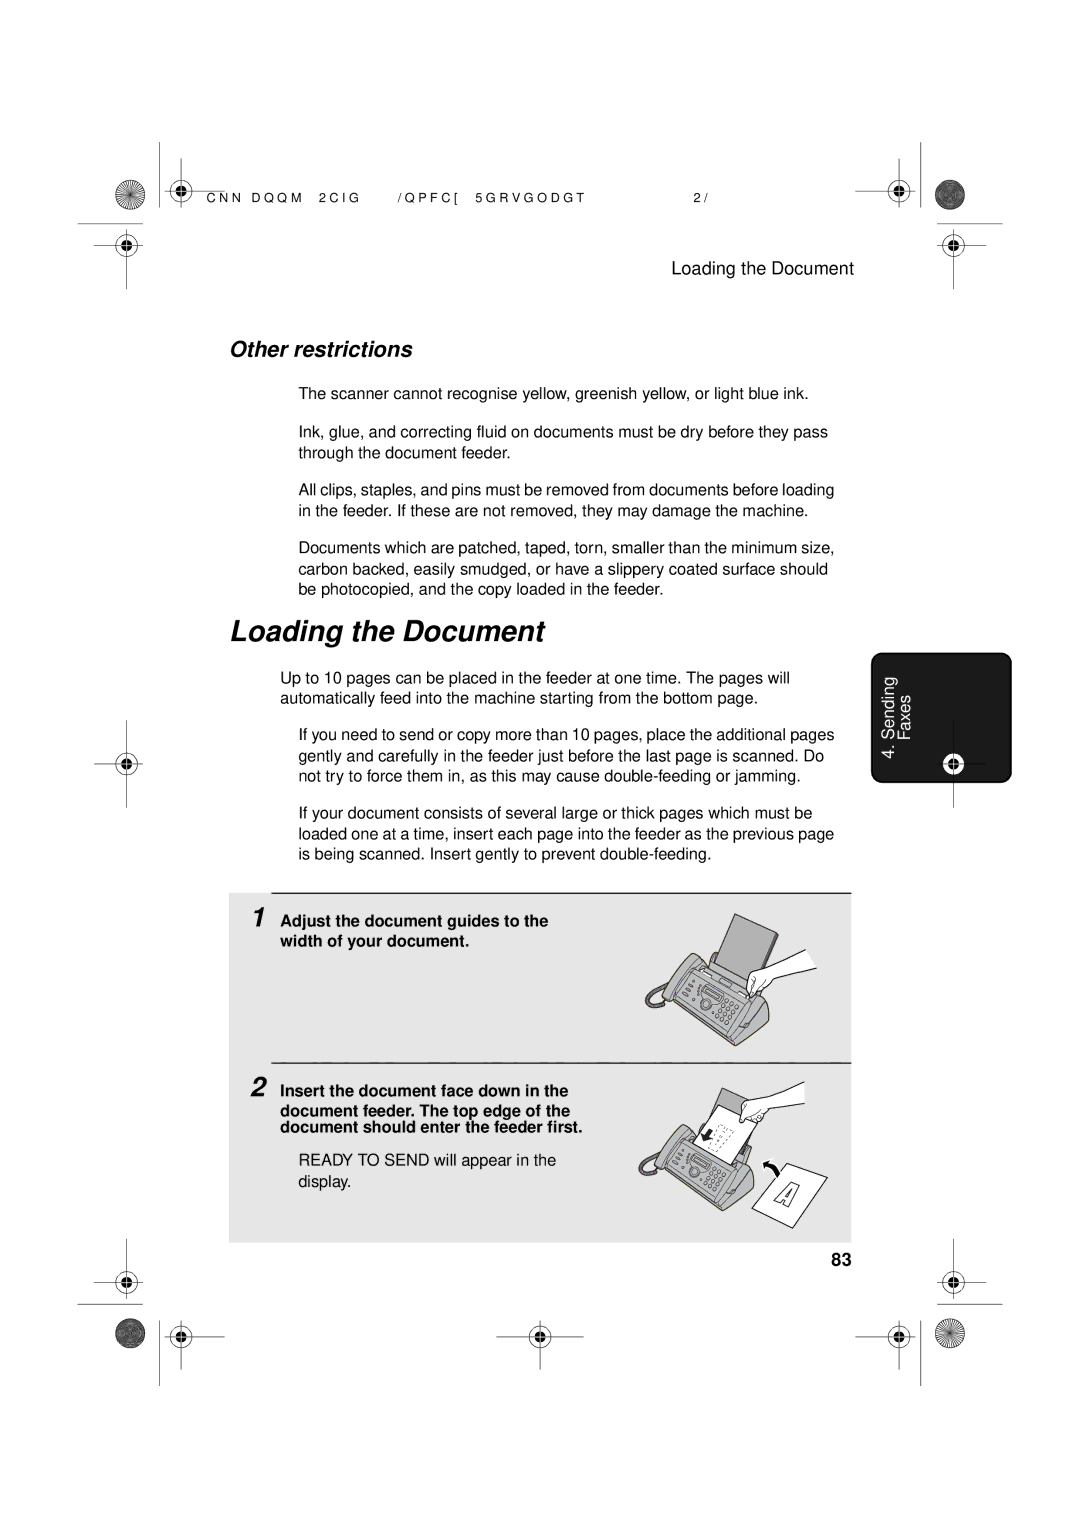 Sharp UX-D50 manual Loading the Document, Other restrictions 